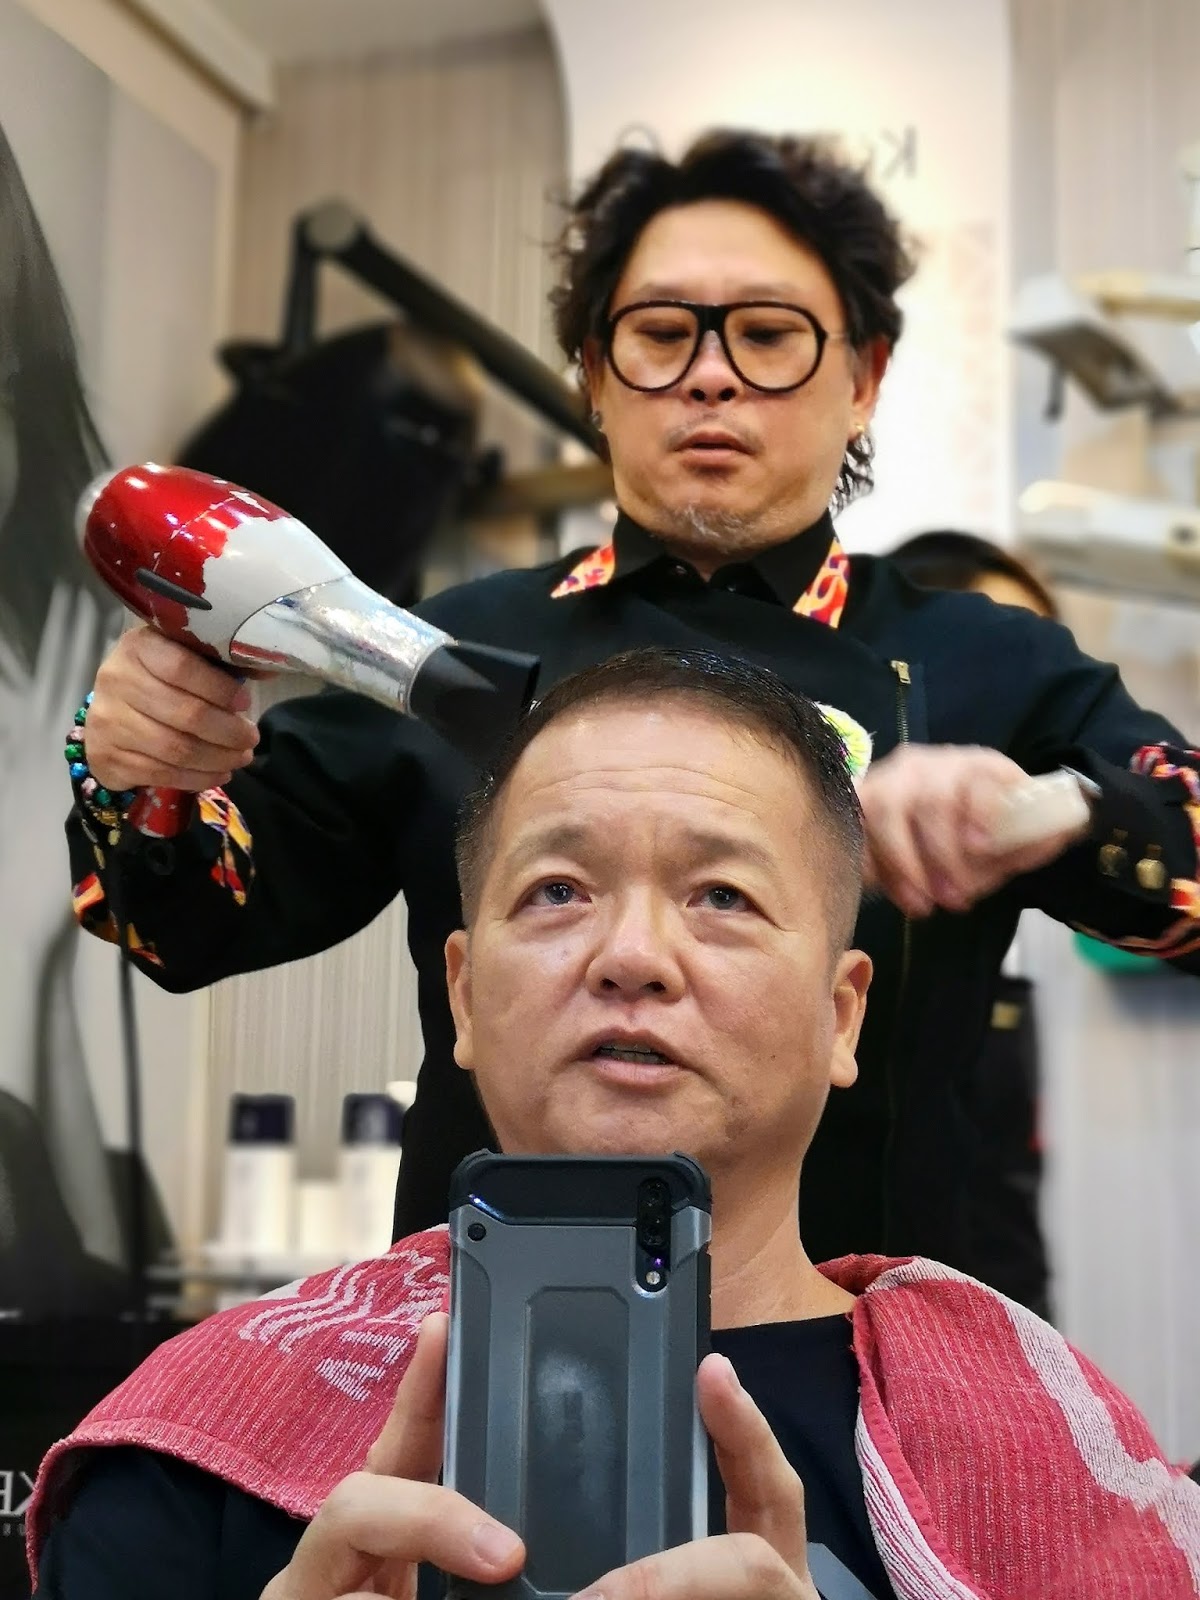 My First Professional Hair Treatment. SHS Hair Studio Prestige in Forum The  Shopping Mall Singapore |Tony Johor Kaki Travels for Food · Heritage ·  Culture · Diplomacy